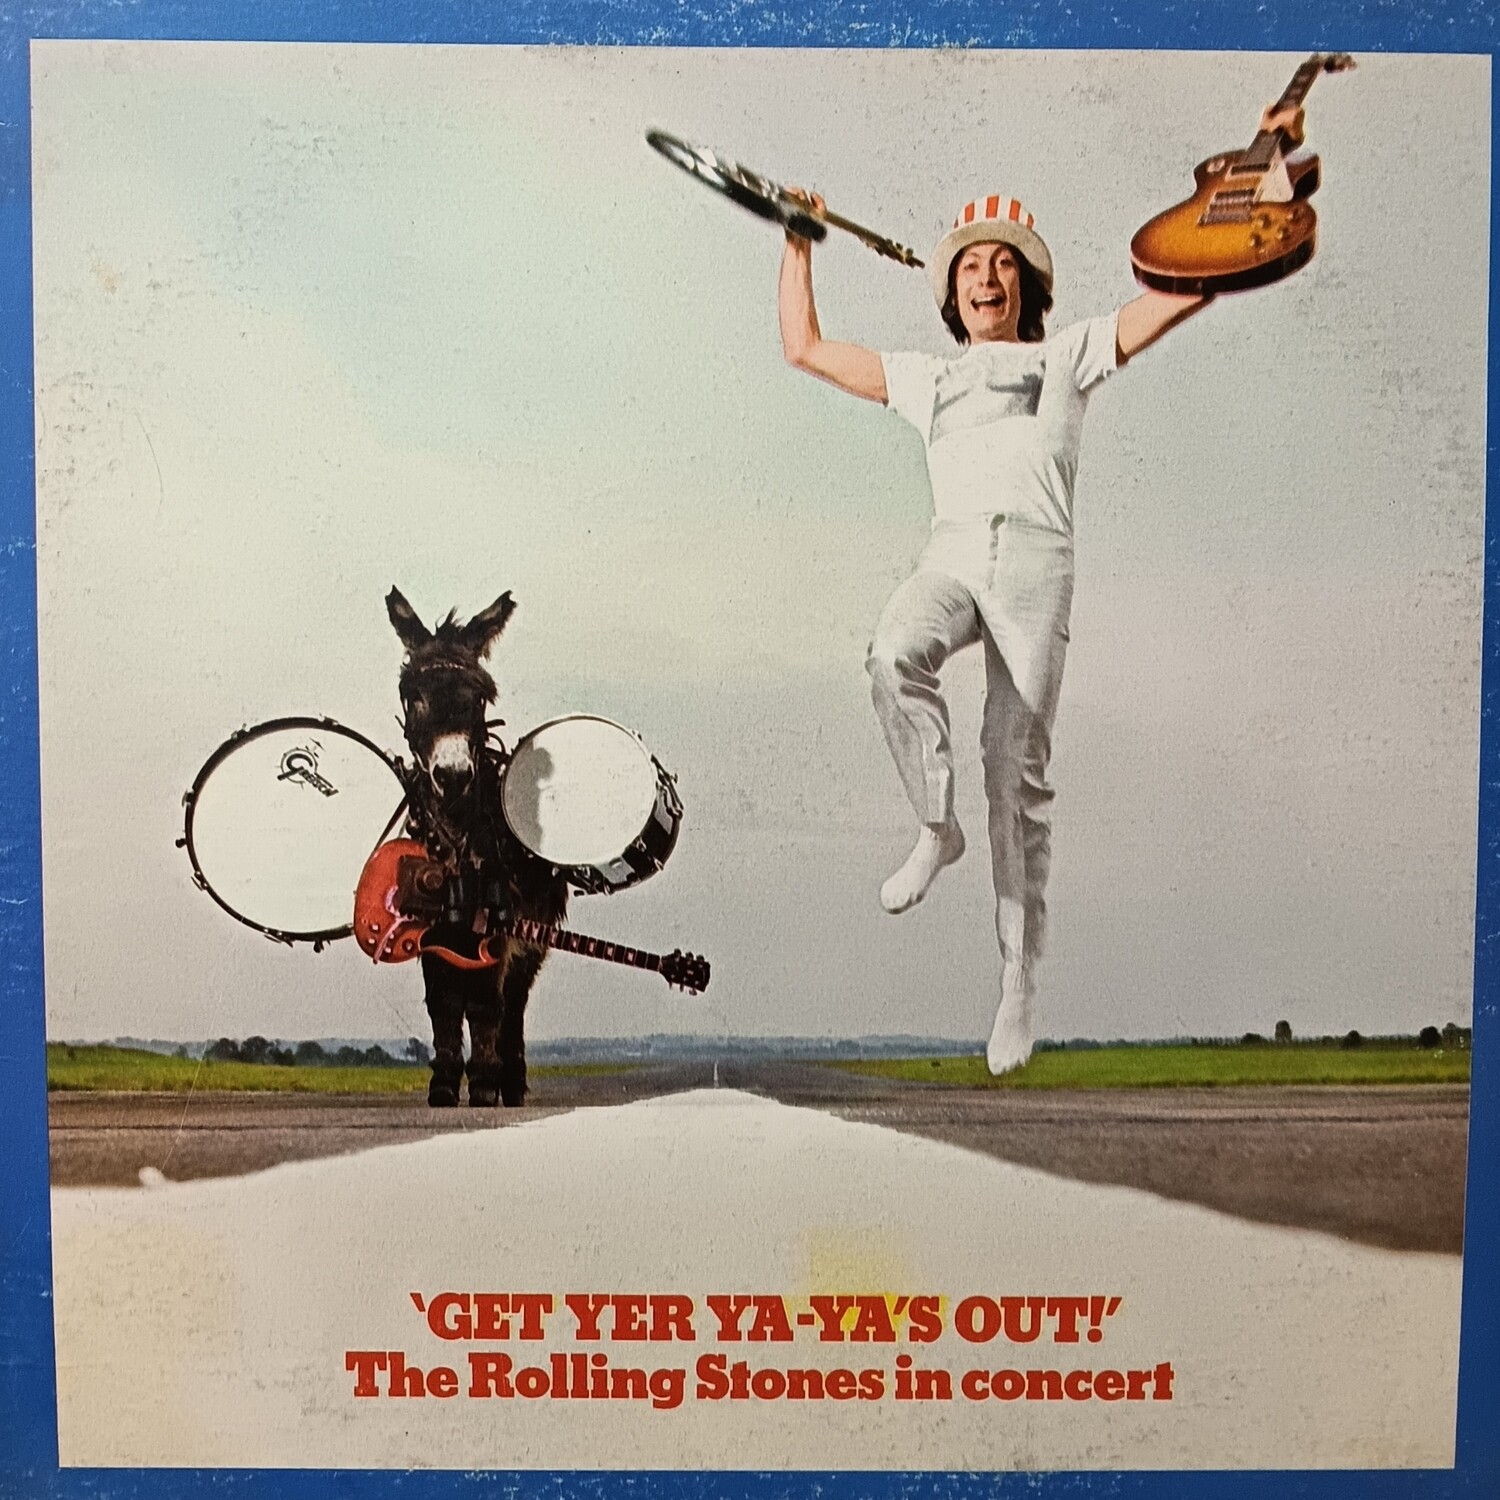 THE ROLLING STONES - Get Yer Ya-Ya's Out